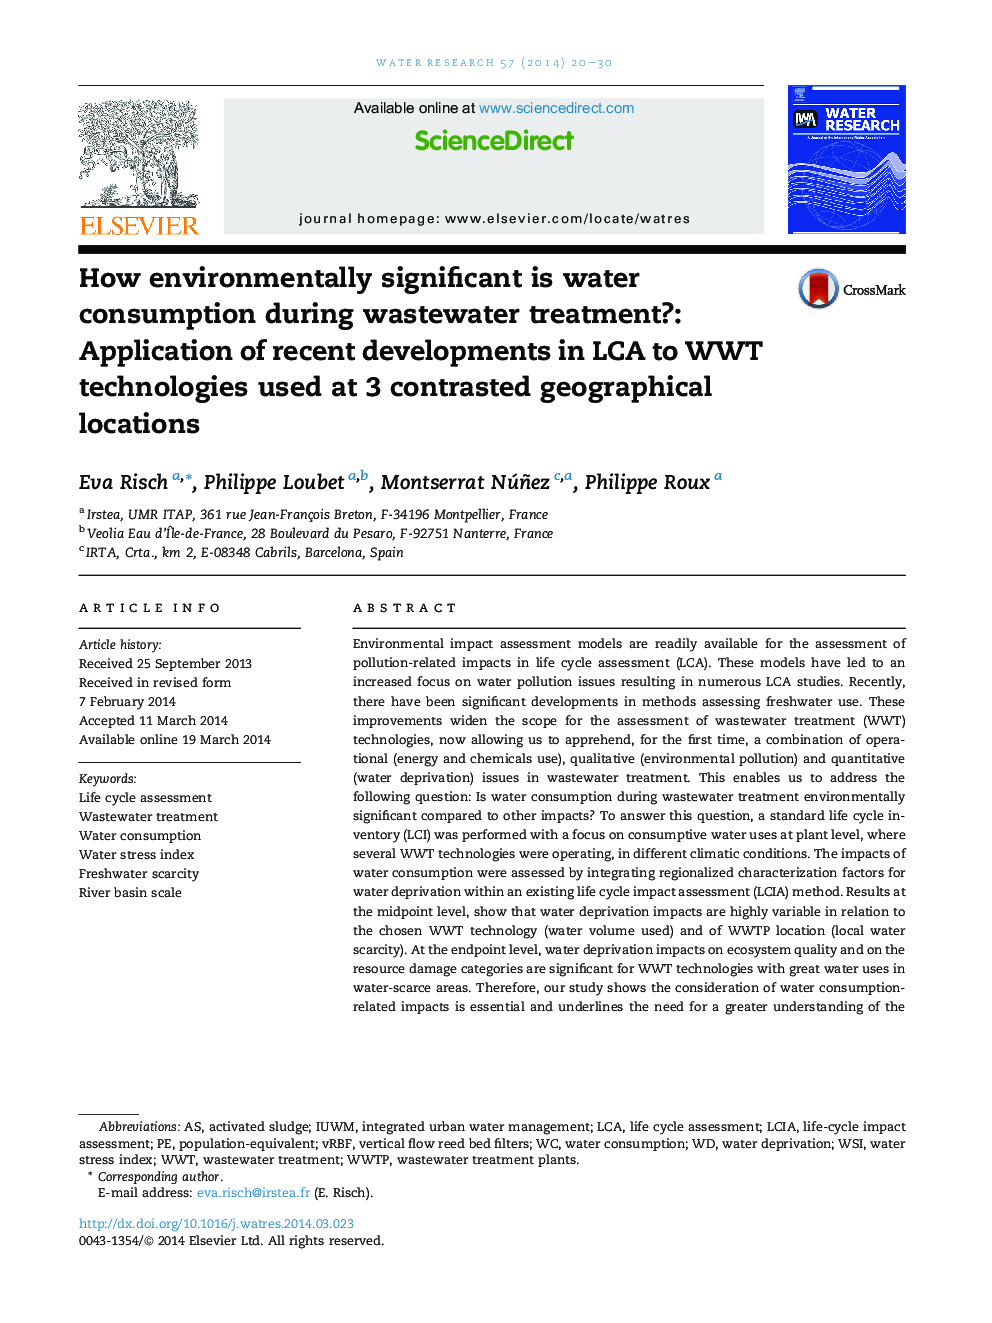 How environmentally significant is water consumption during wastewater treatment?: Application of recent developments in LCA to WWT technologies used at 3 contrasted geographical locations